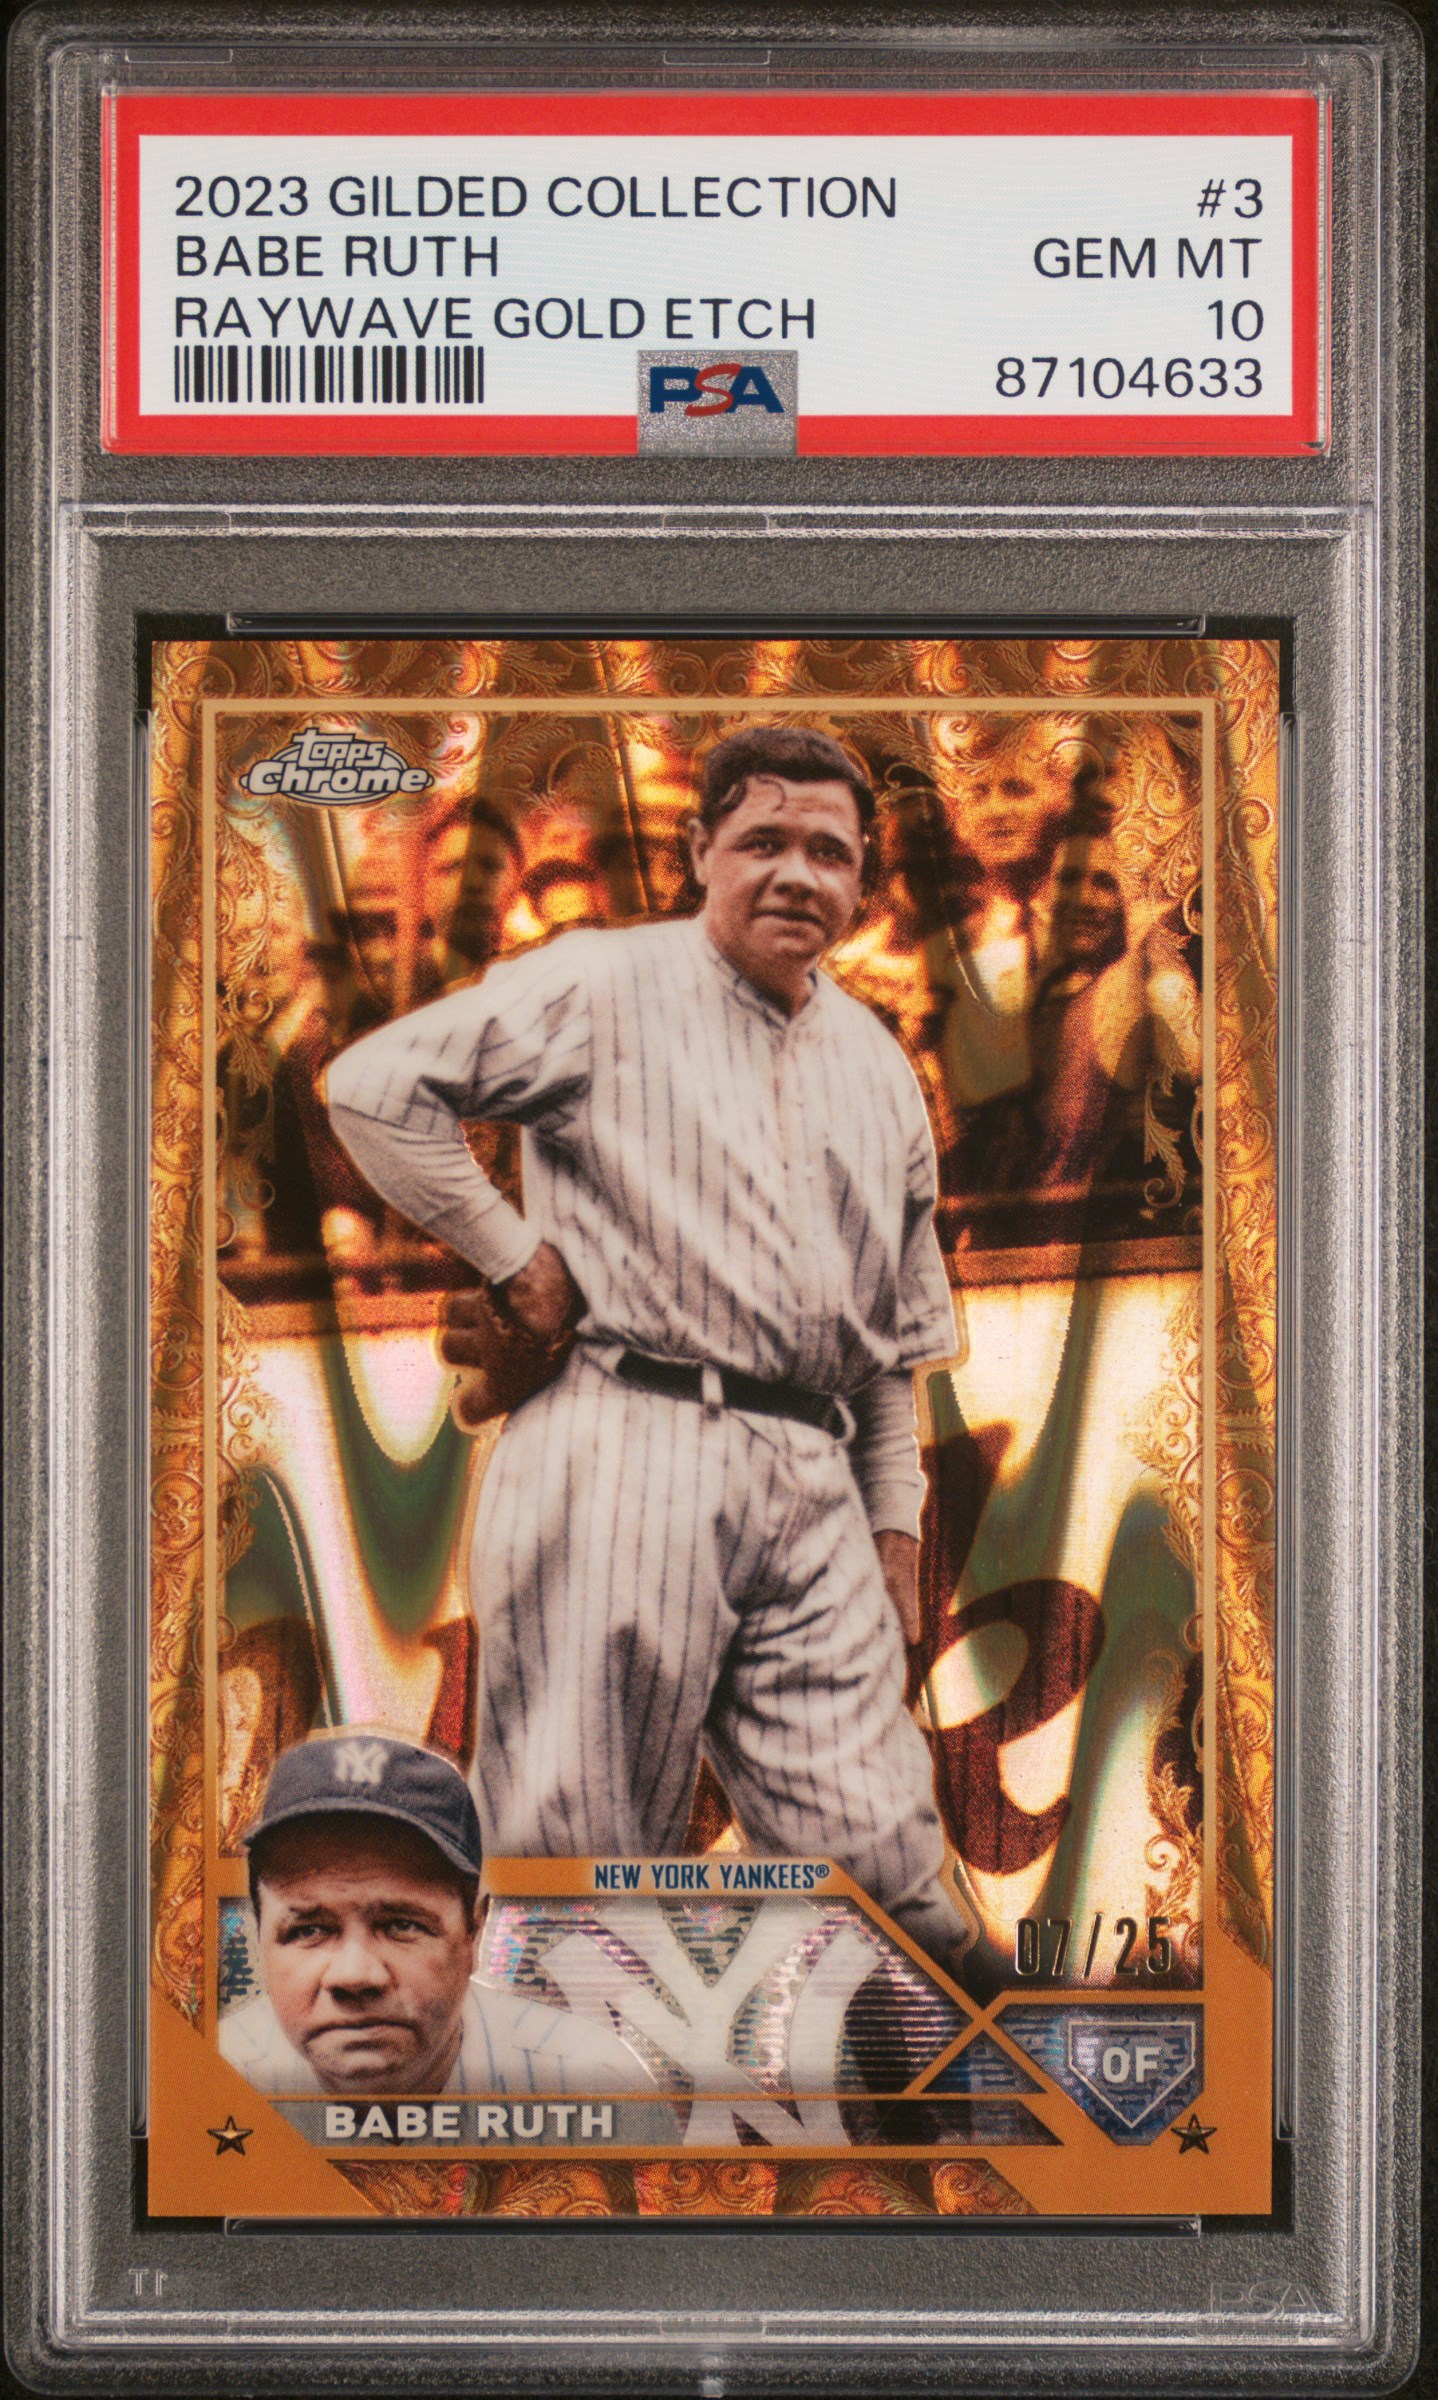 2023 Topps Gilded Collection Raywave Gold Etch #3 Babe Ruth (#07/25) – PSA GEM MT 10